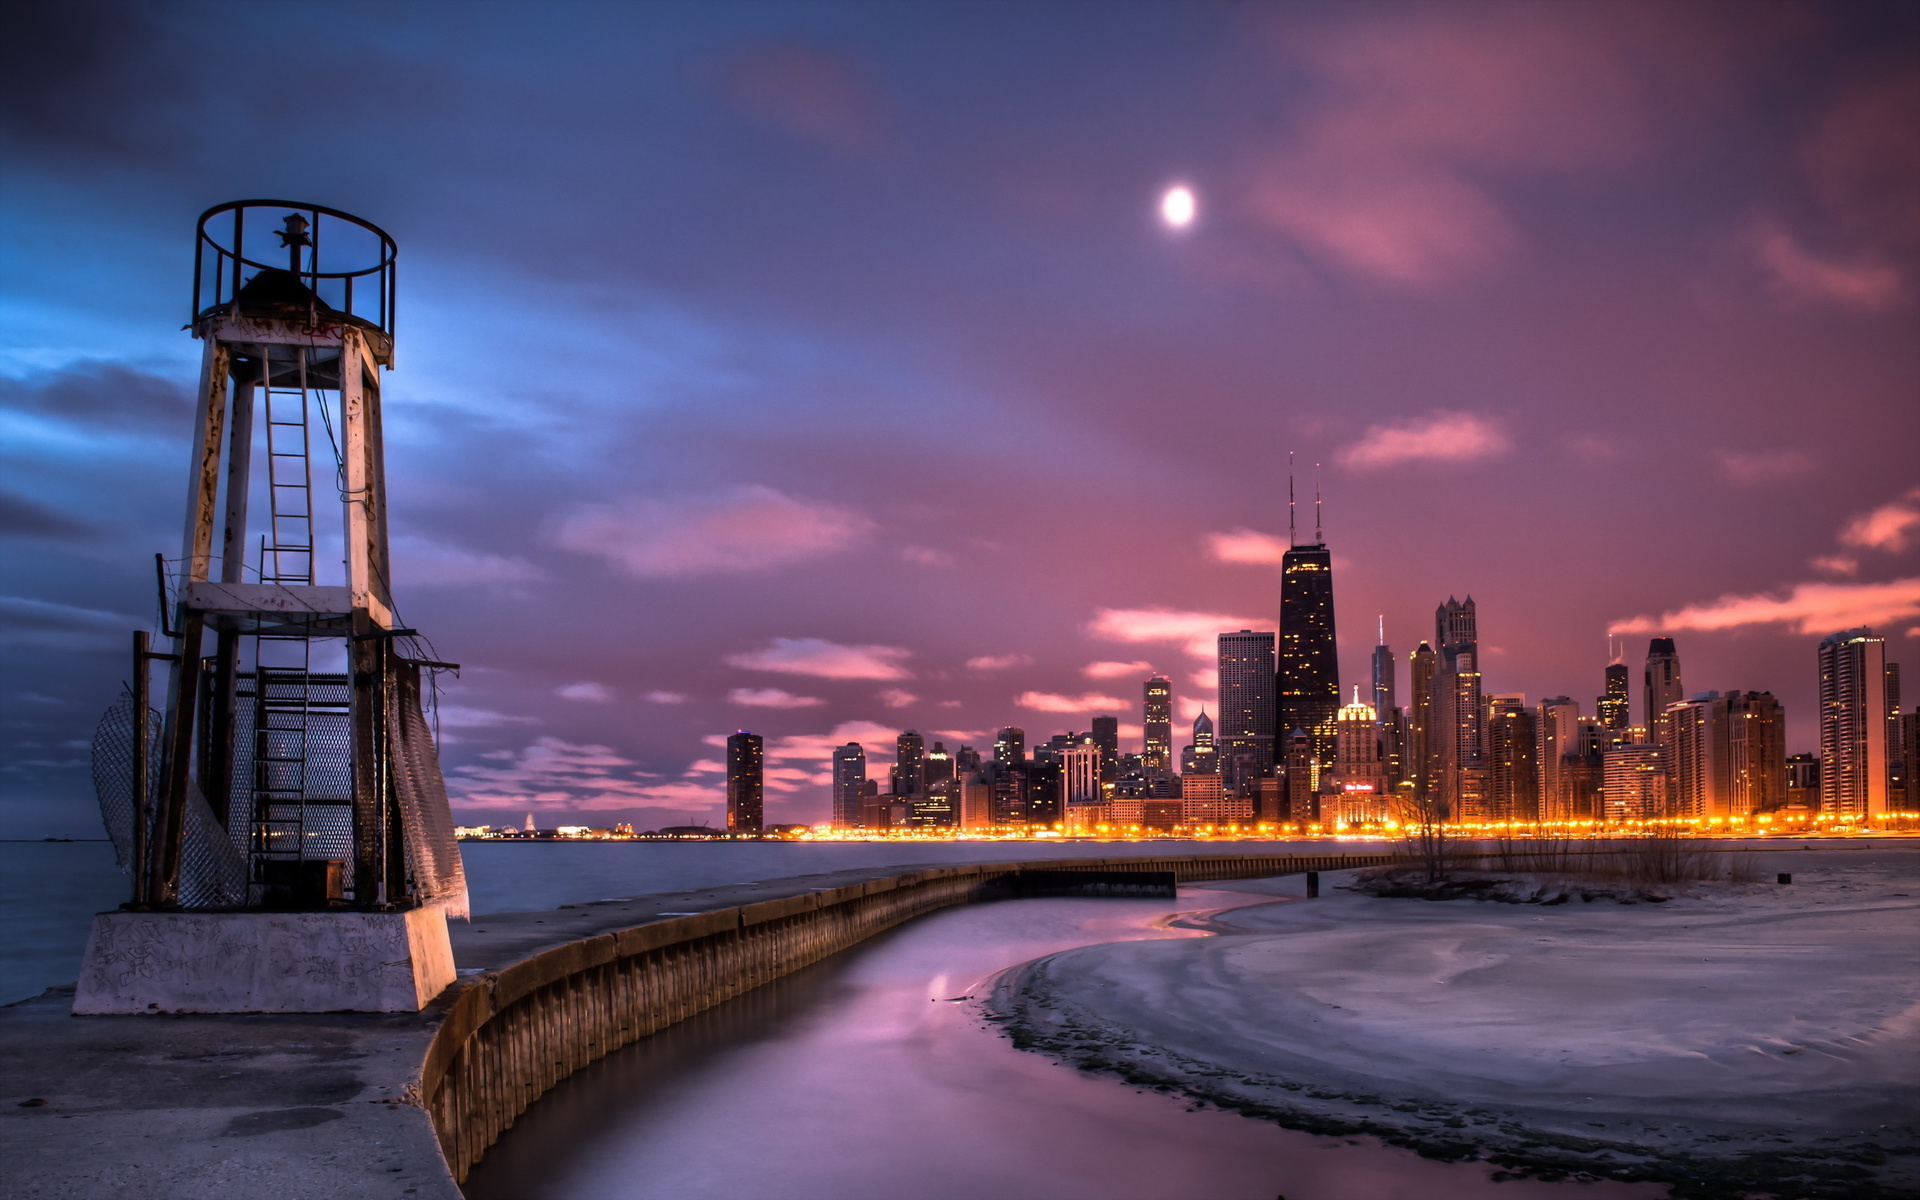 chicago, Winter, Ice, Jetty, Lighthouse, Lakes, Night, Lights, Architecture, Buildings, Skyscraper, Sky, Clouds Wallpaper